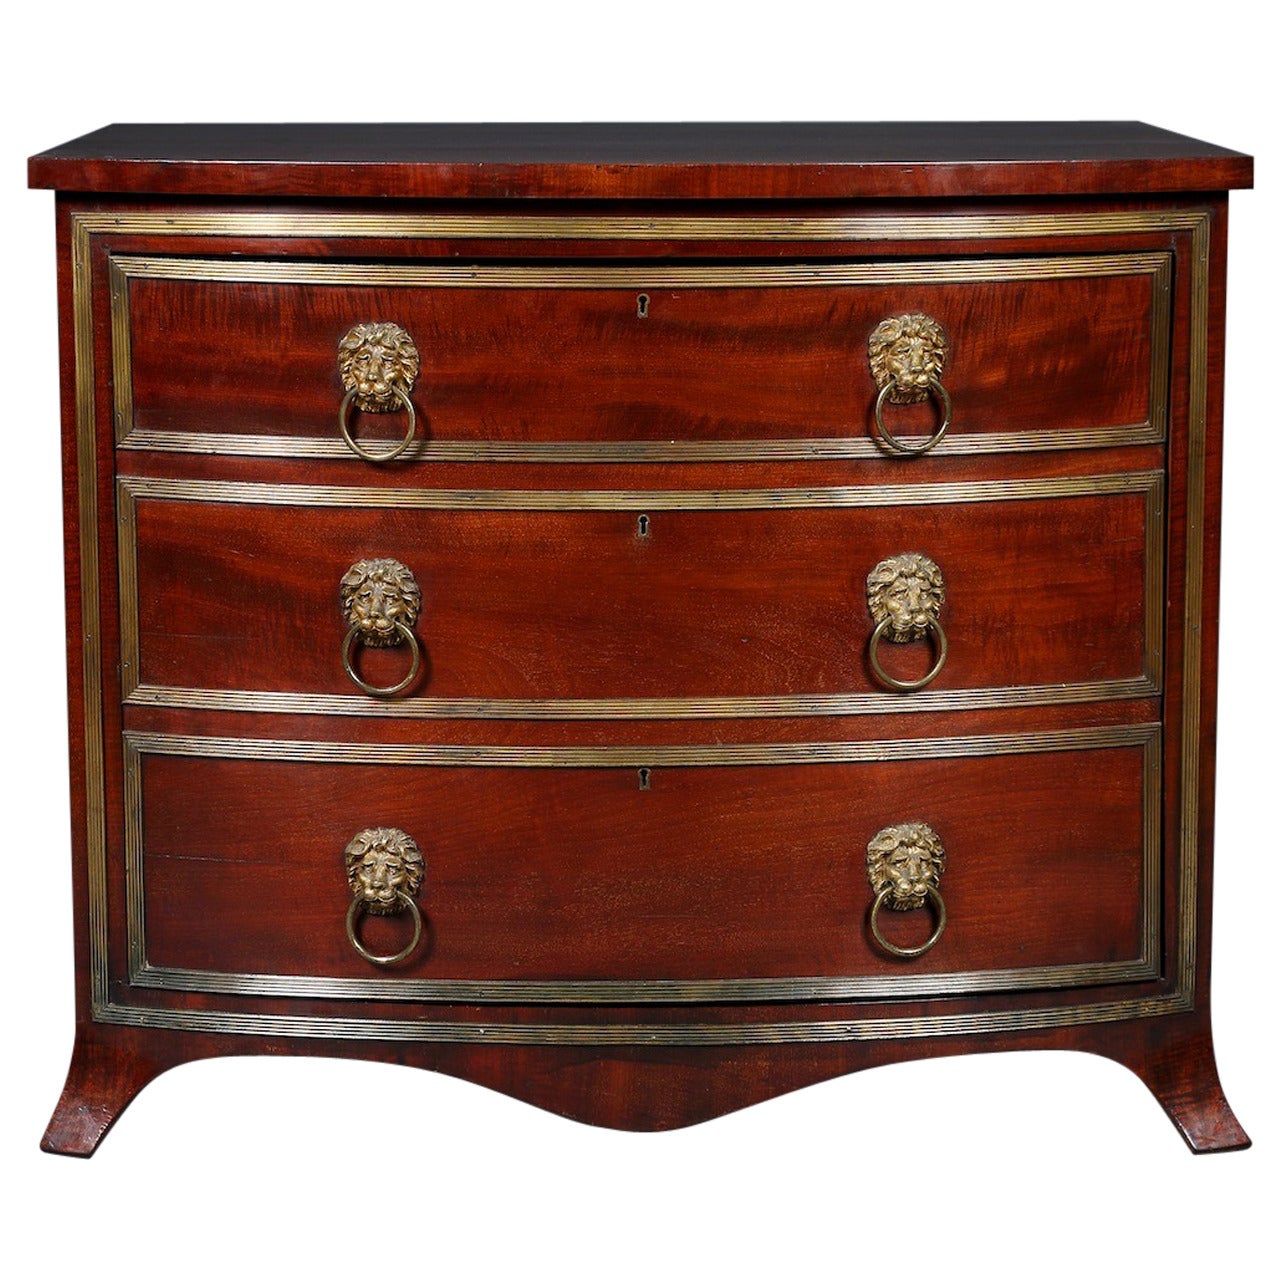 Rare Bow Fronted ‘Safe’ Cabinet by S. Mordan & Co For Sale